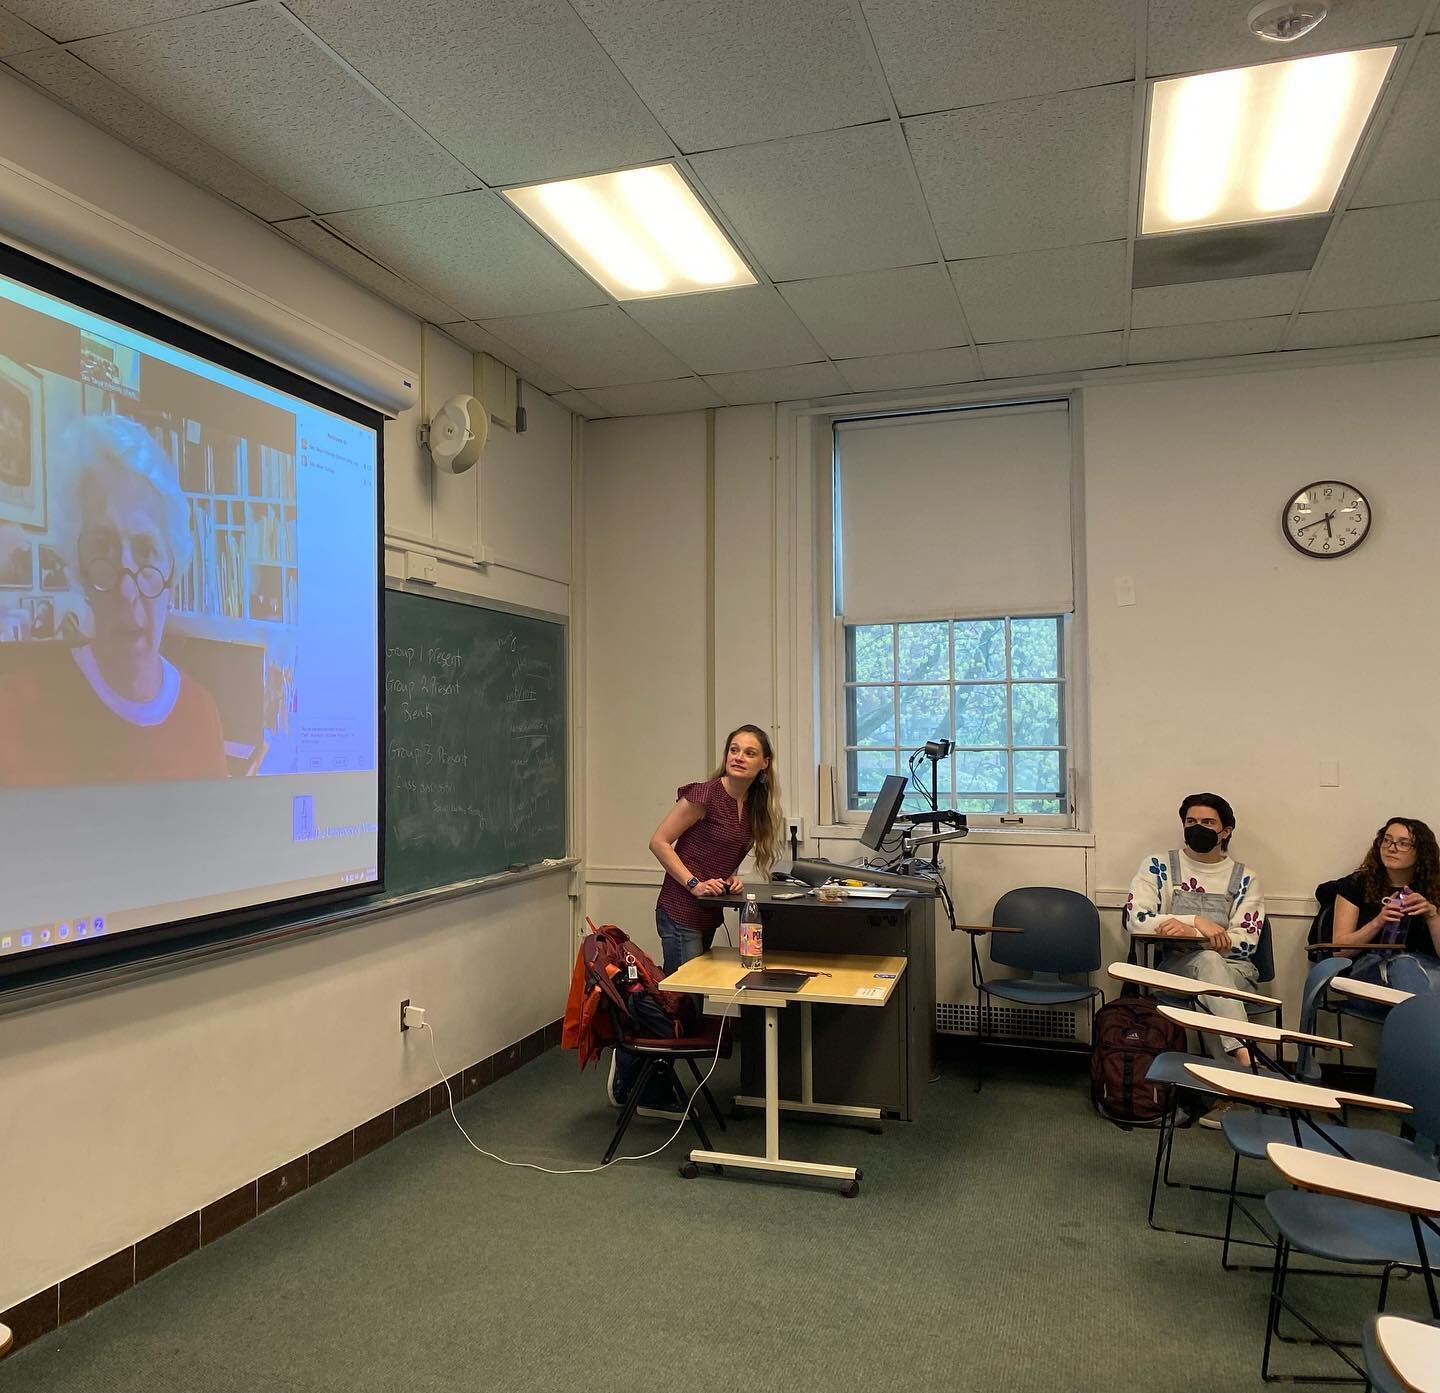 This afternoon @alison.h.clarkson and I heard some great policy presentations from students in @tanyavforvt social work class at @universityofvermont! 
We should be hopeful about tomorrows #socialworkers (and todays!) with their quick grasp of where 